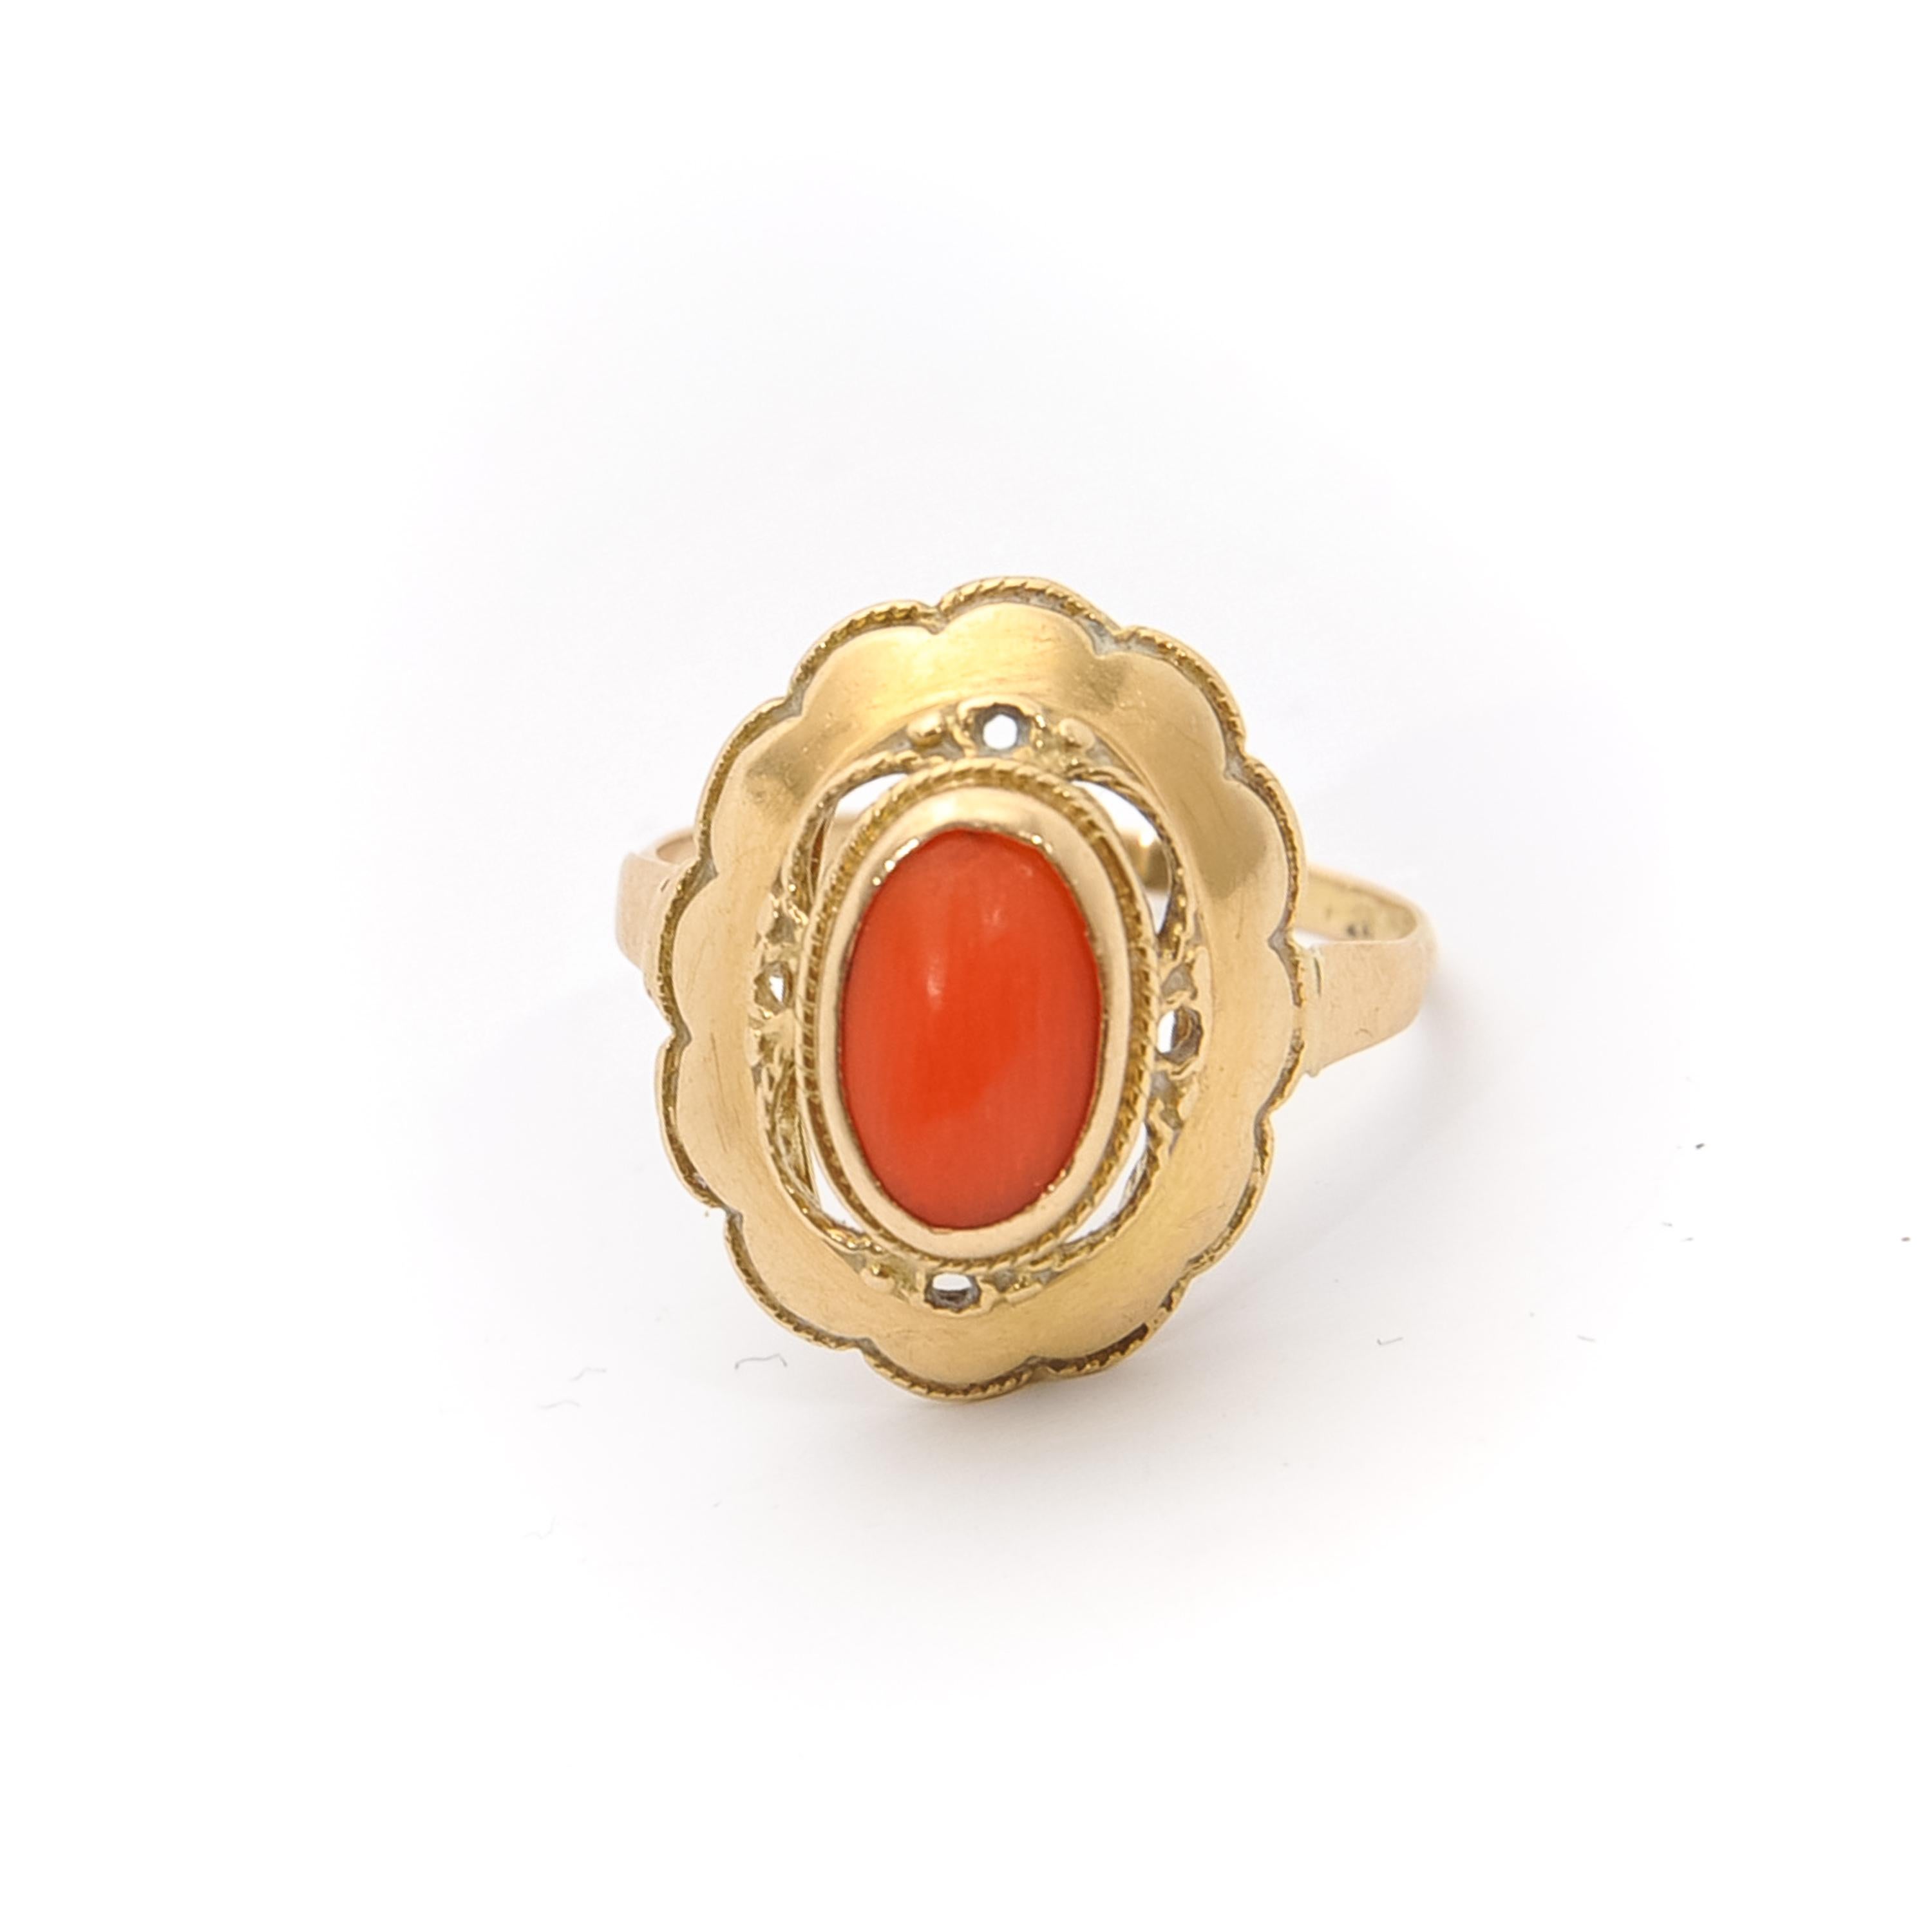 A vintage 14 karat gold ring set with a natural cabochon coral in a rich openwork frame. The oval-shaped gold ring featuring a beautifully scalloped border.

The *coral ring is in beautiful condition. Marked. Tested as 14k gold. 

Measurements: H